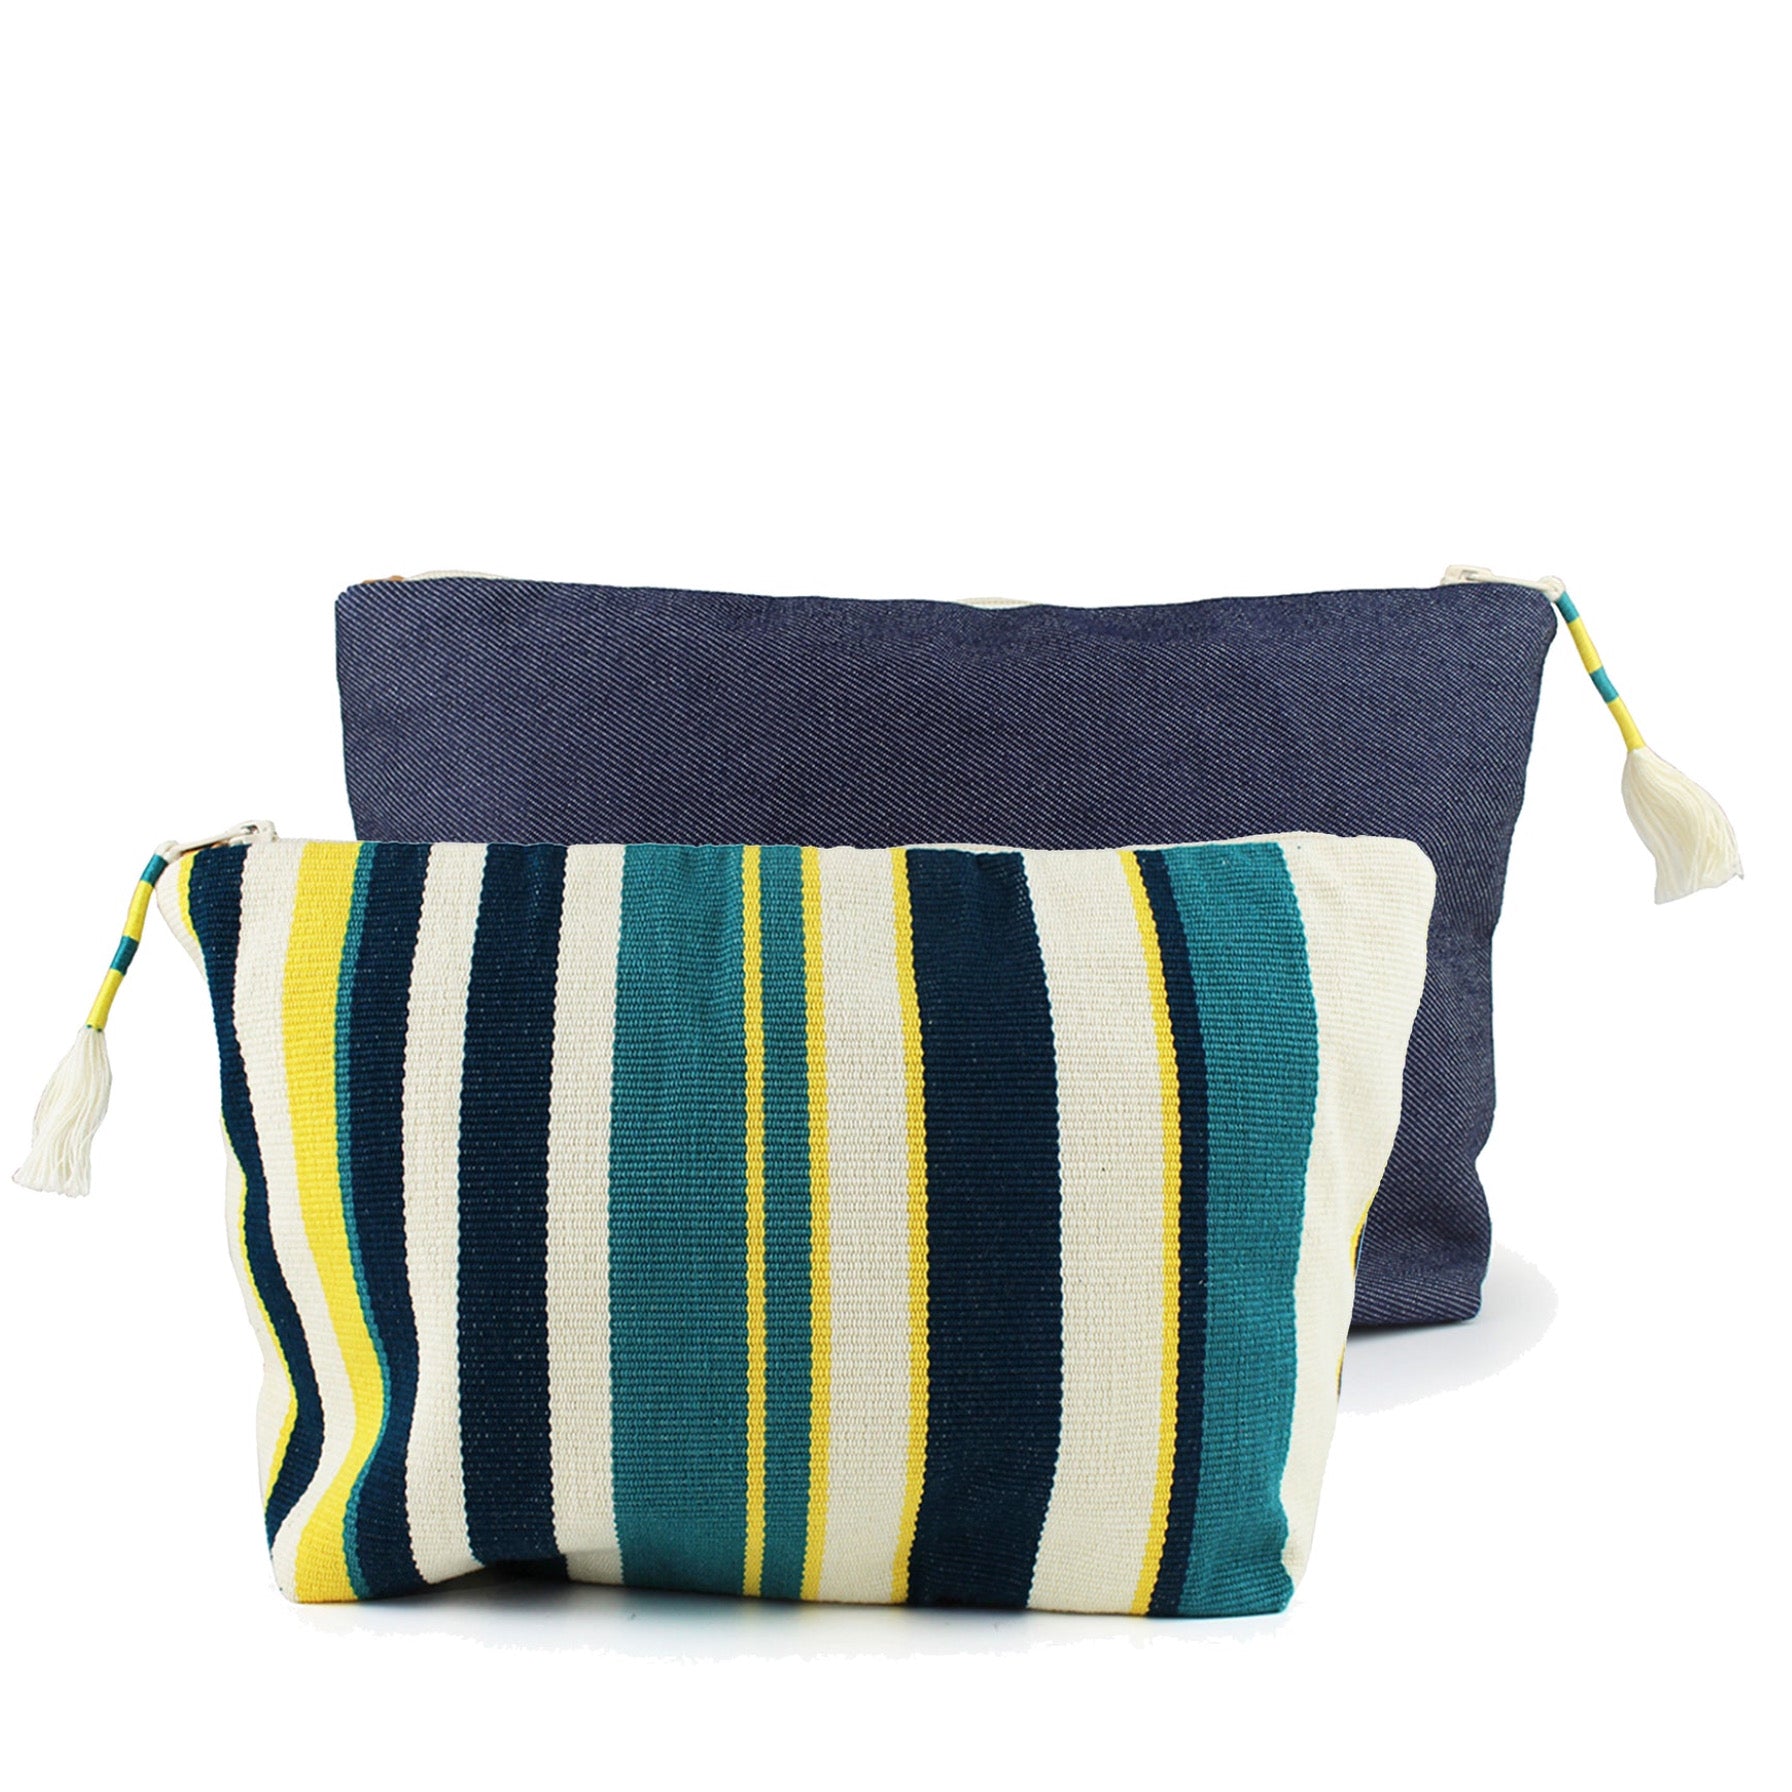 Two hand woven artisan Cristina Pouches in Denim Pacific are together that show the front and back patterns of the bag. The front pattern has vertical dark blue, turquoise, lemon yellow, and beige stripes. The back has a dark wash denim fabric. It has a tassel with wrap around yellow and turquoise thread.